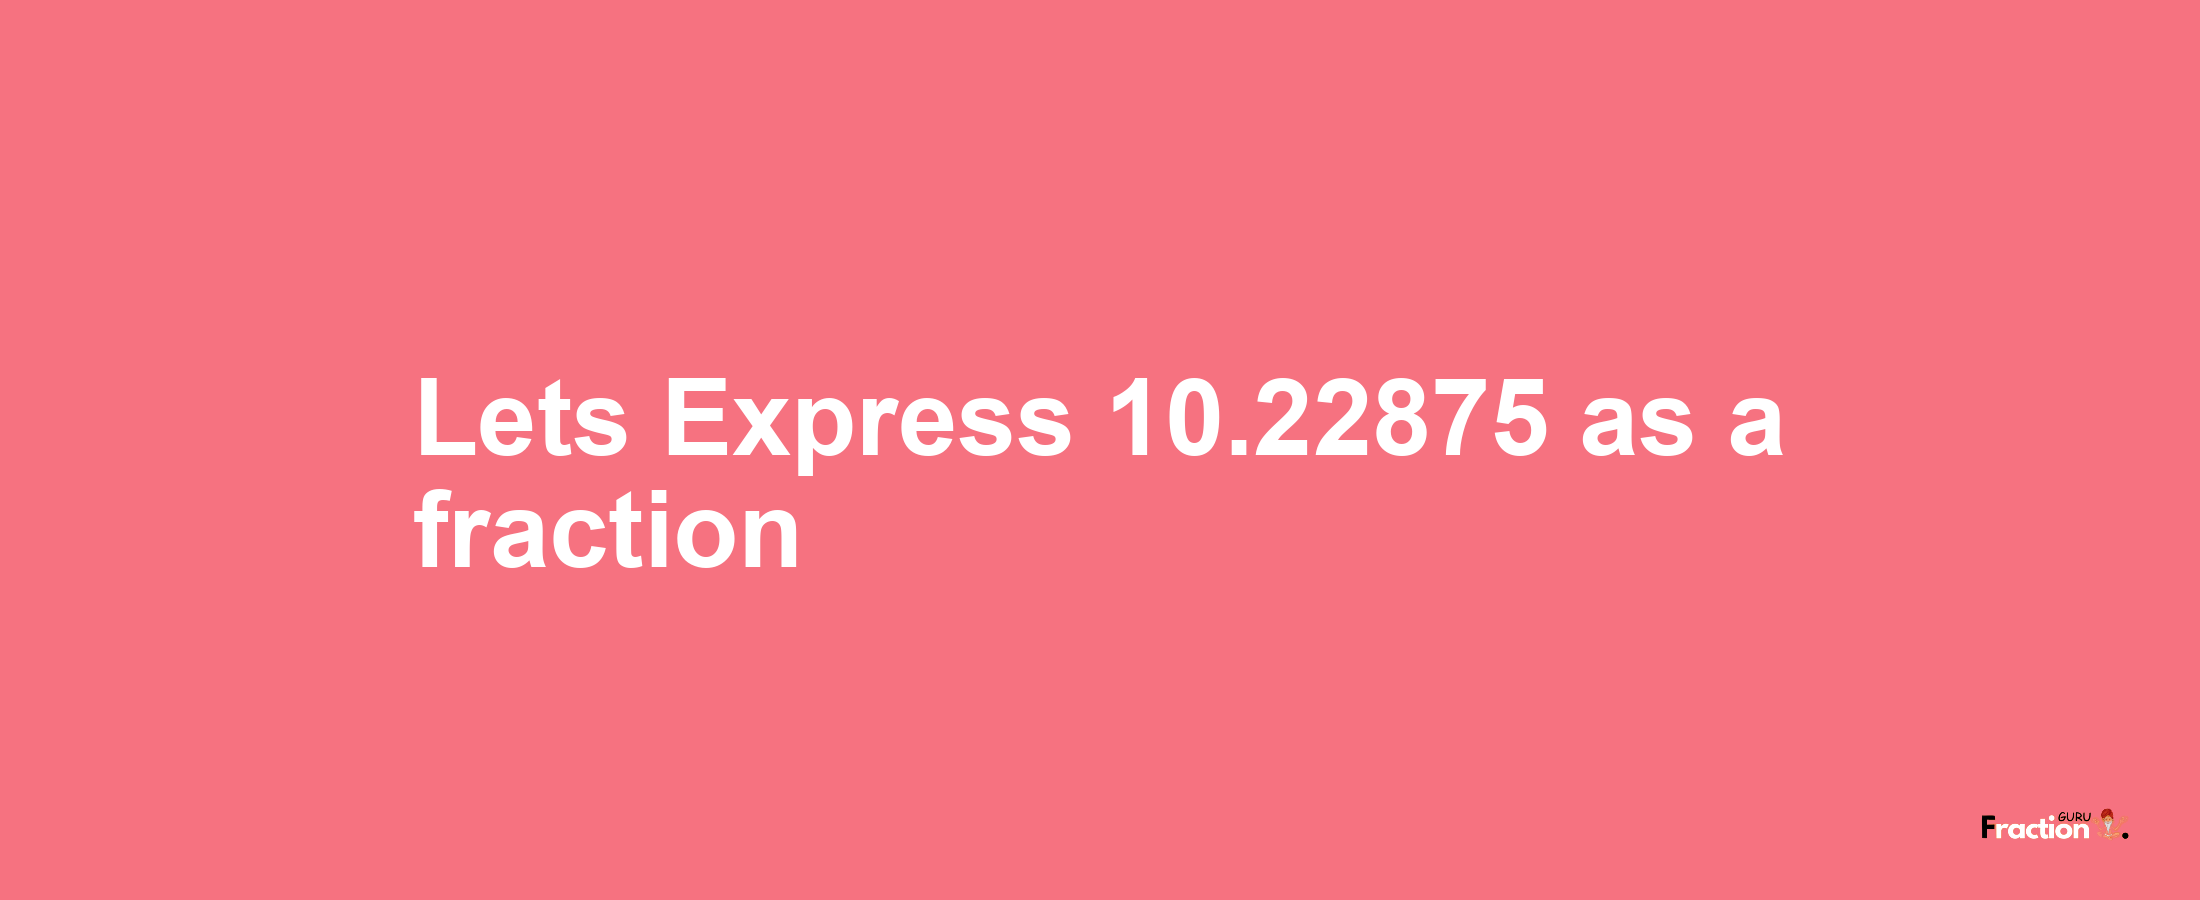 Lets Express 10.22875 as afraction